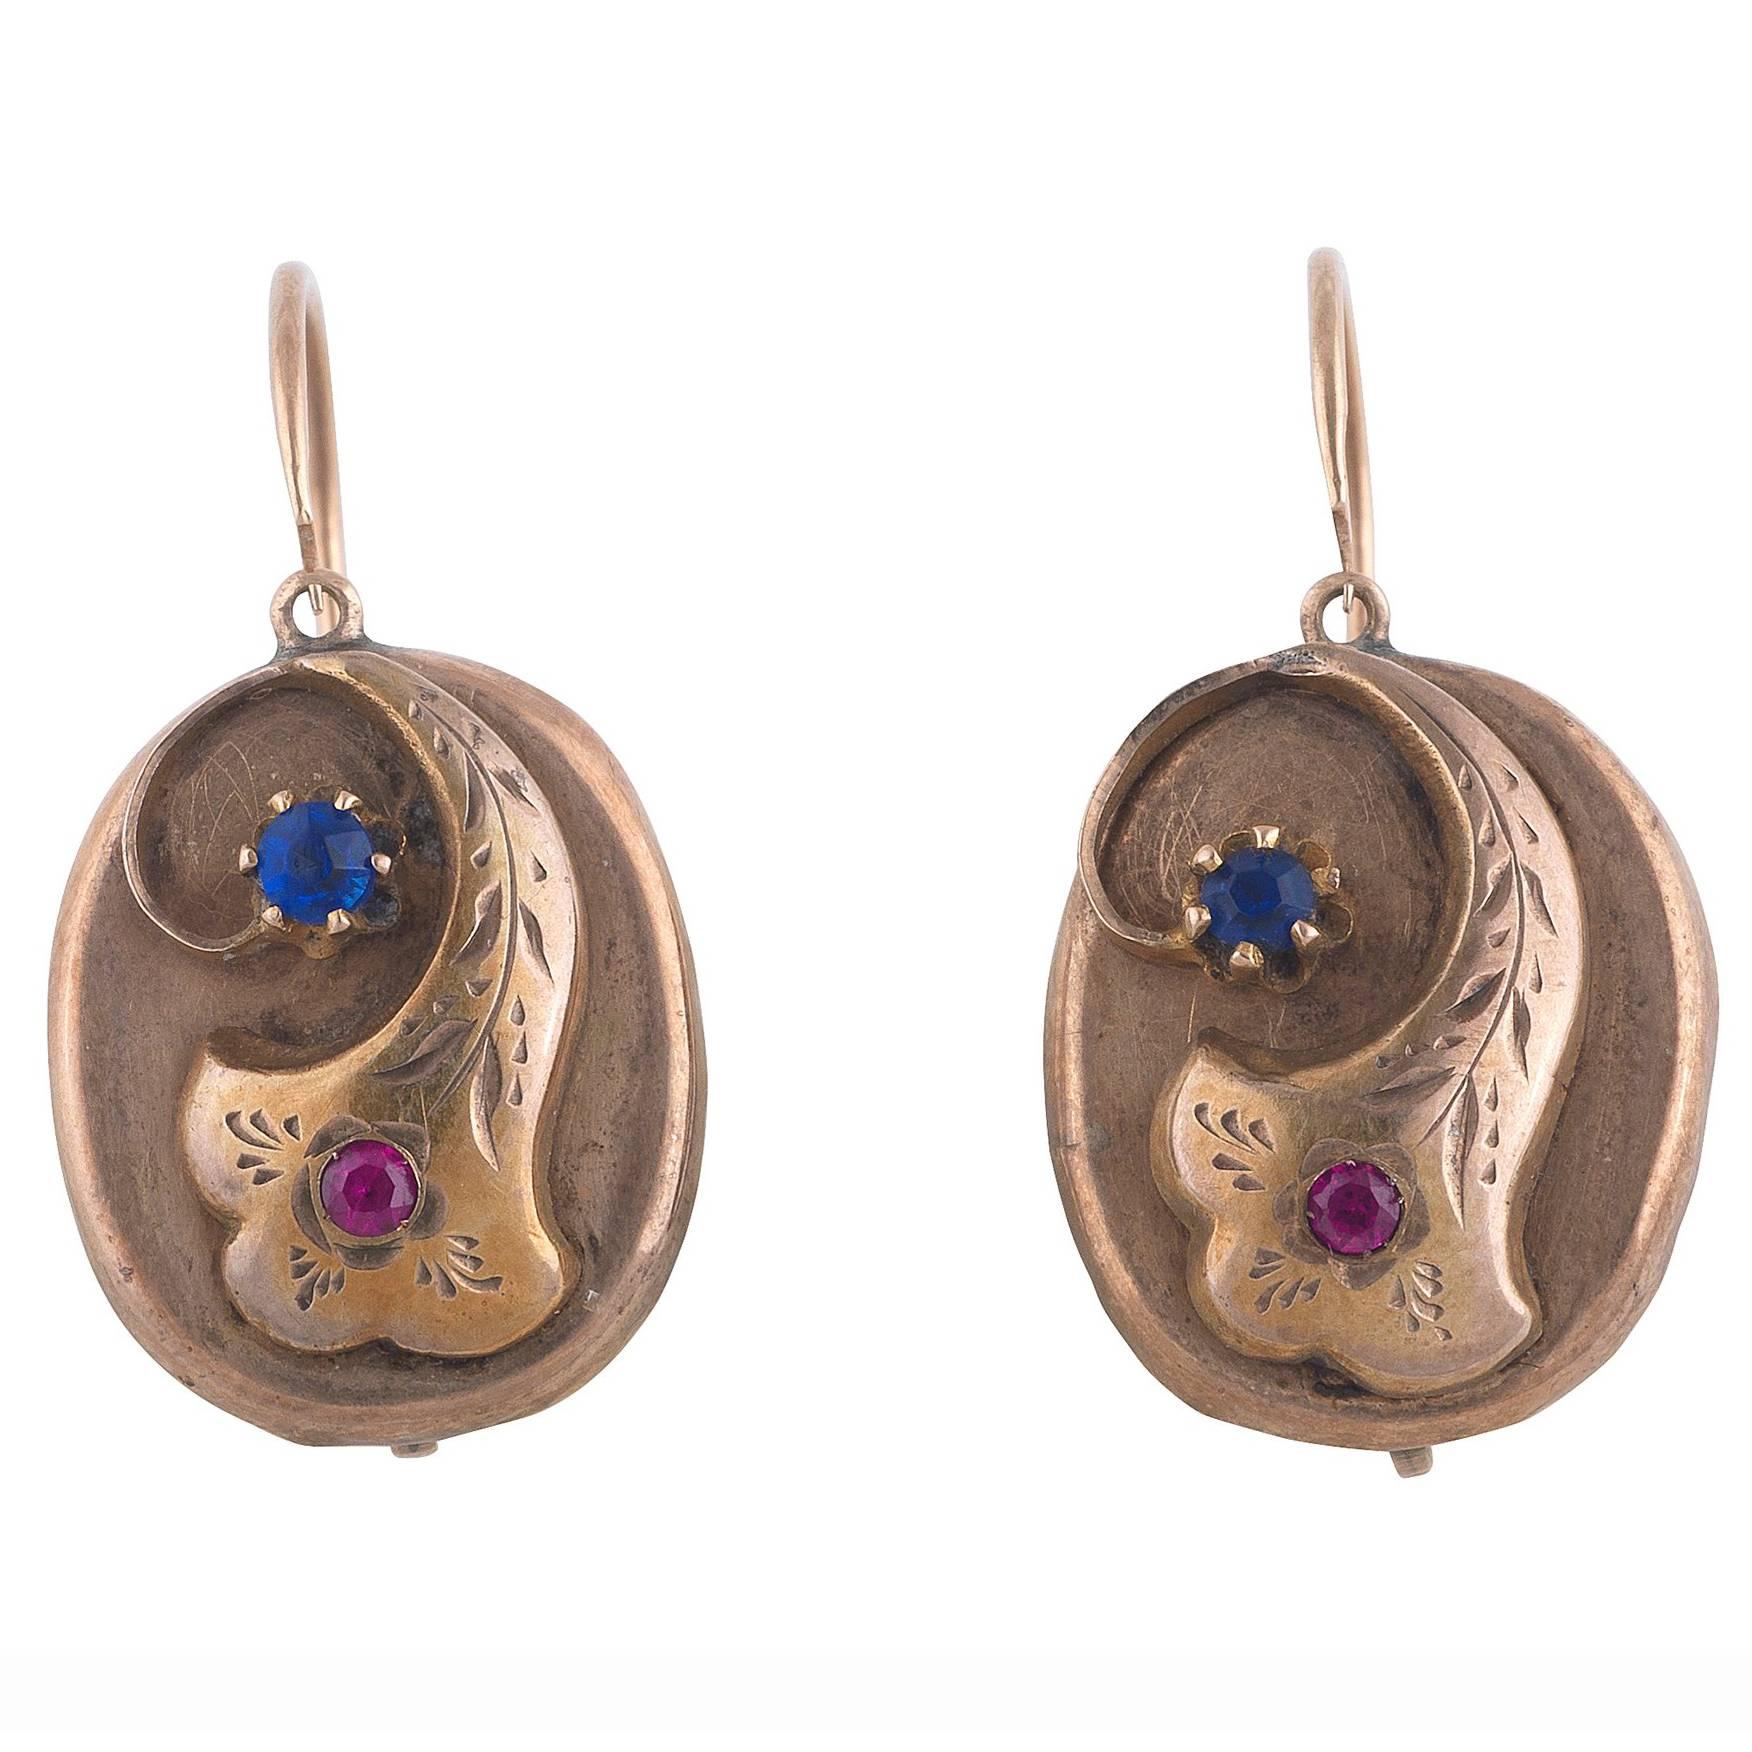 Mid-19th Century Neapolitan Pair of Gold Earrings For Sale